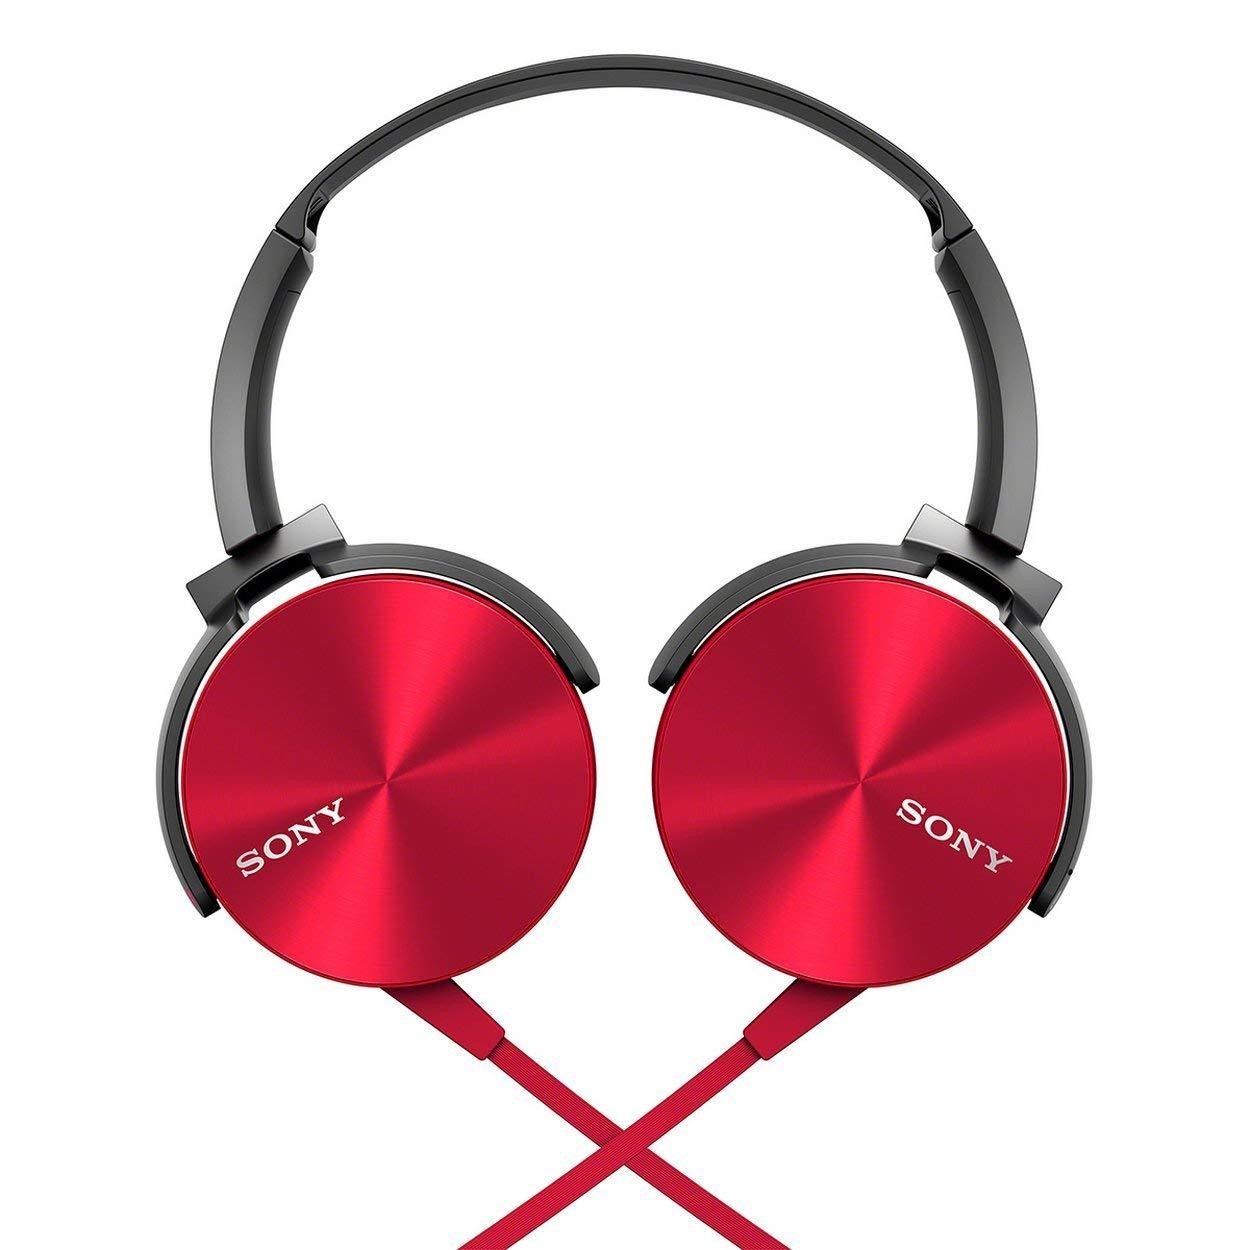 Sony MDR-XB450 On-Ear Headphones Without Mic, Red